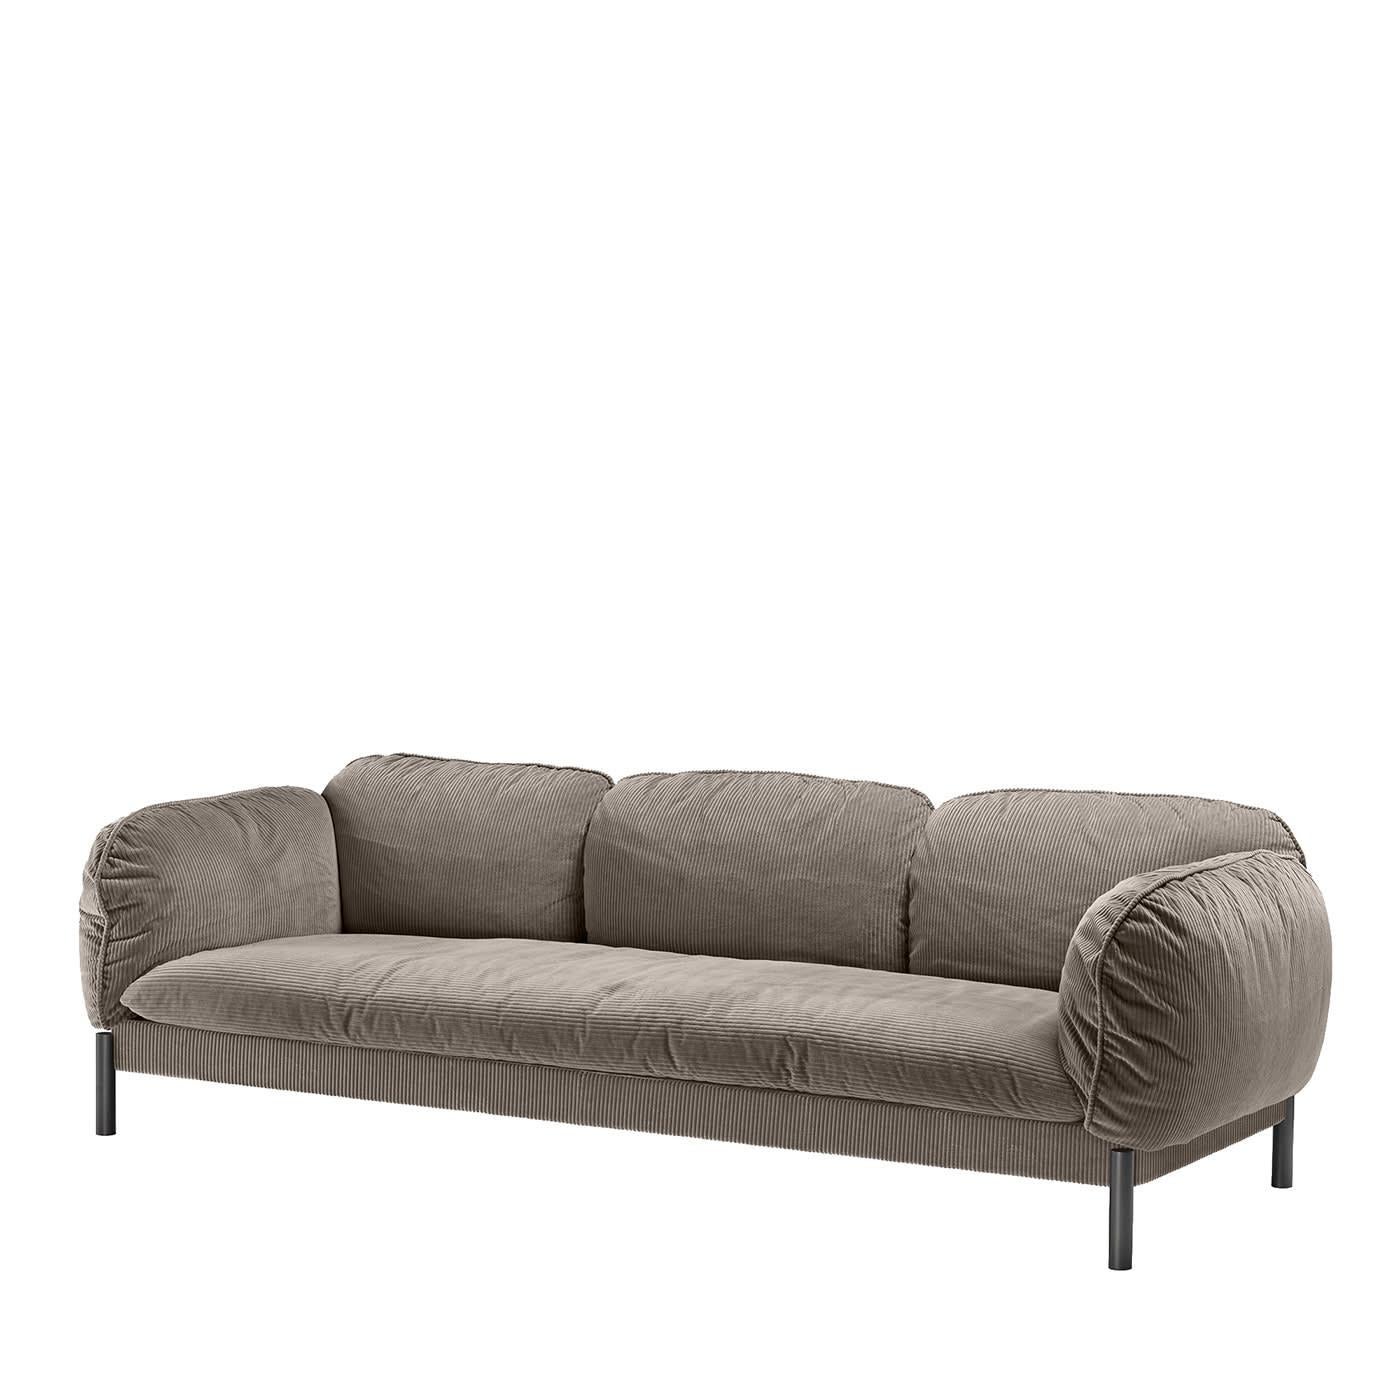 Raised on essential cylindrical feet, the bold silhouette of this sofa will ensure moments of authentic relaxation thanks to a combination of generous padding and taupe corduroy, which will also provide a superb tactile feel. Fluffy cushions compose